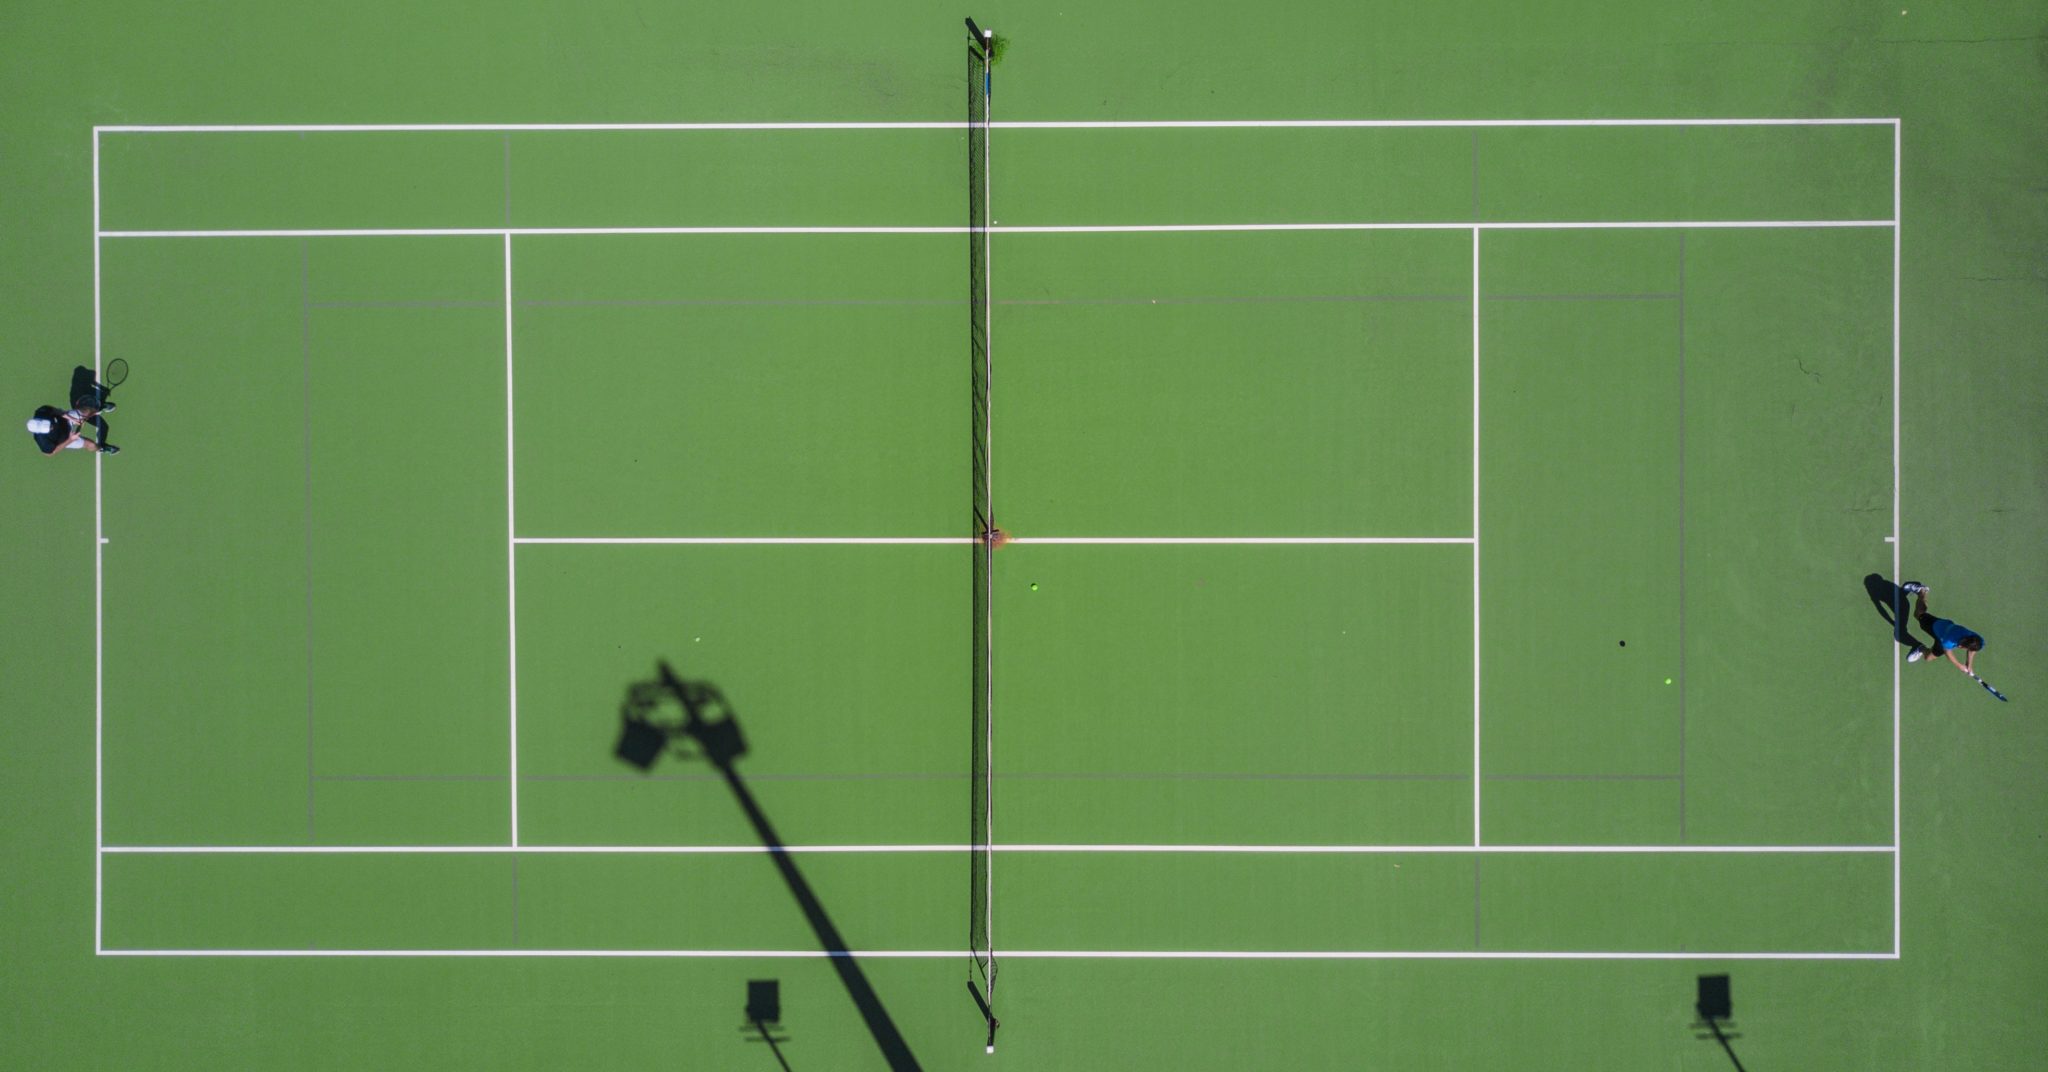 lines marked on a tennis court